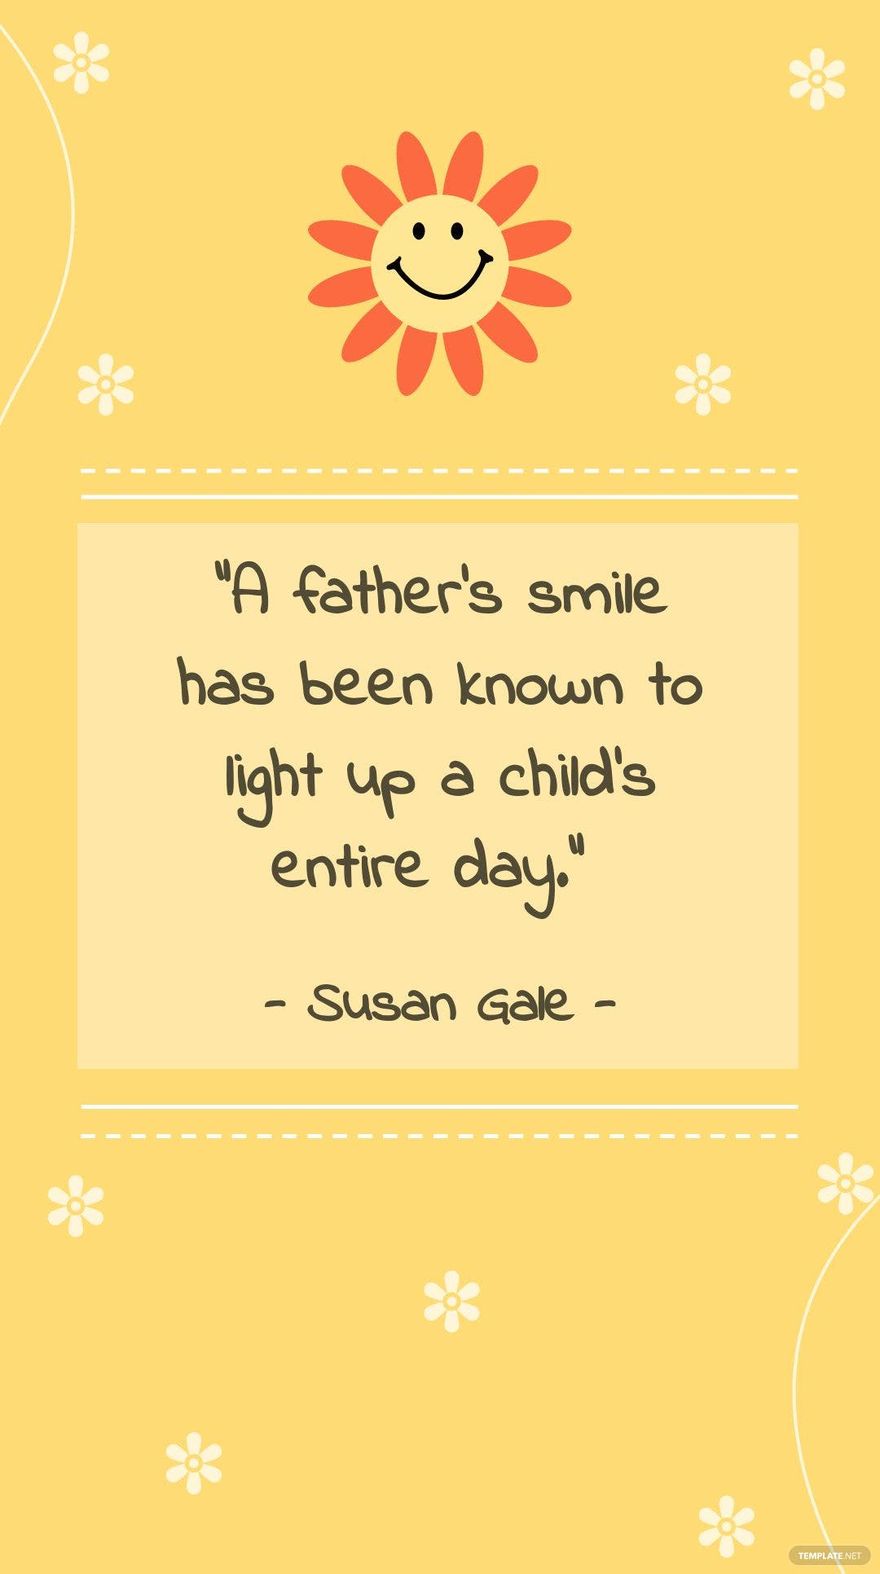 Free Susan Gale - “A father’s smile has been known to light up a child’s entire day.” 